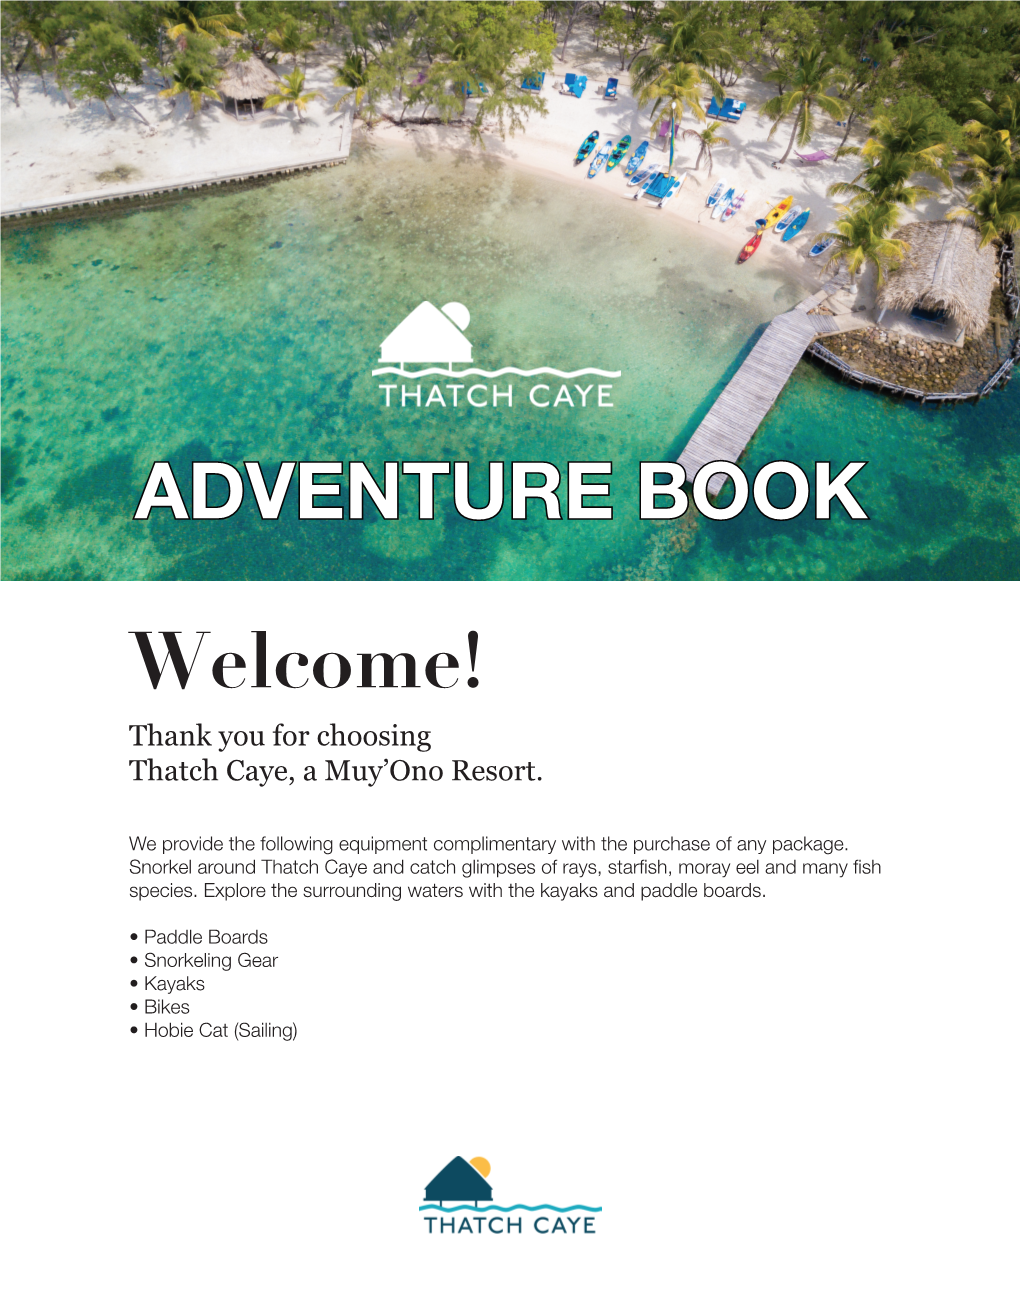 ADVENTURE BOOK Welcome! Thank You for Choosing Thatch Caye, a Muy’Ono Resort